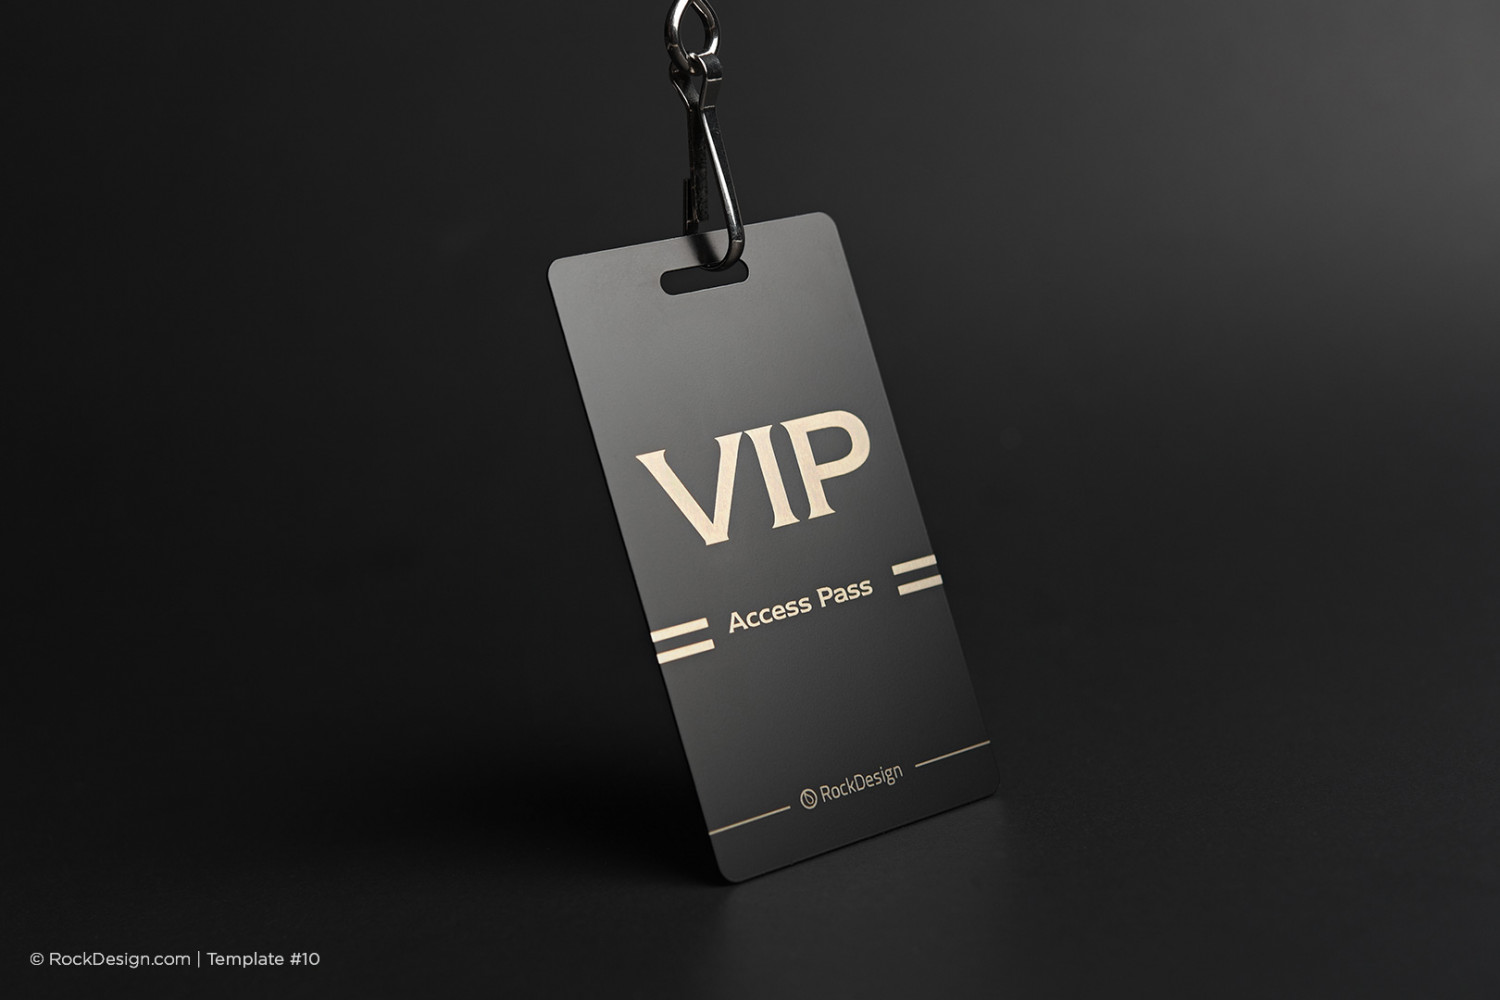 print-online-with-free-club-vip-business-card-templates-rockdesign